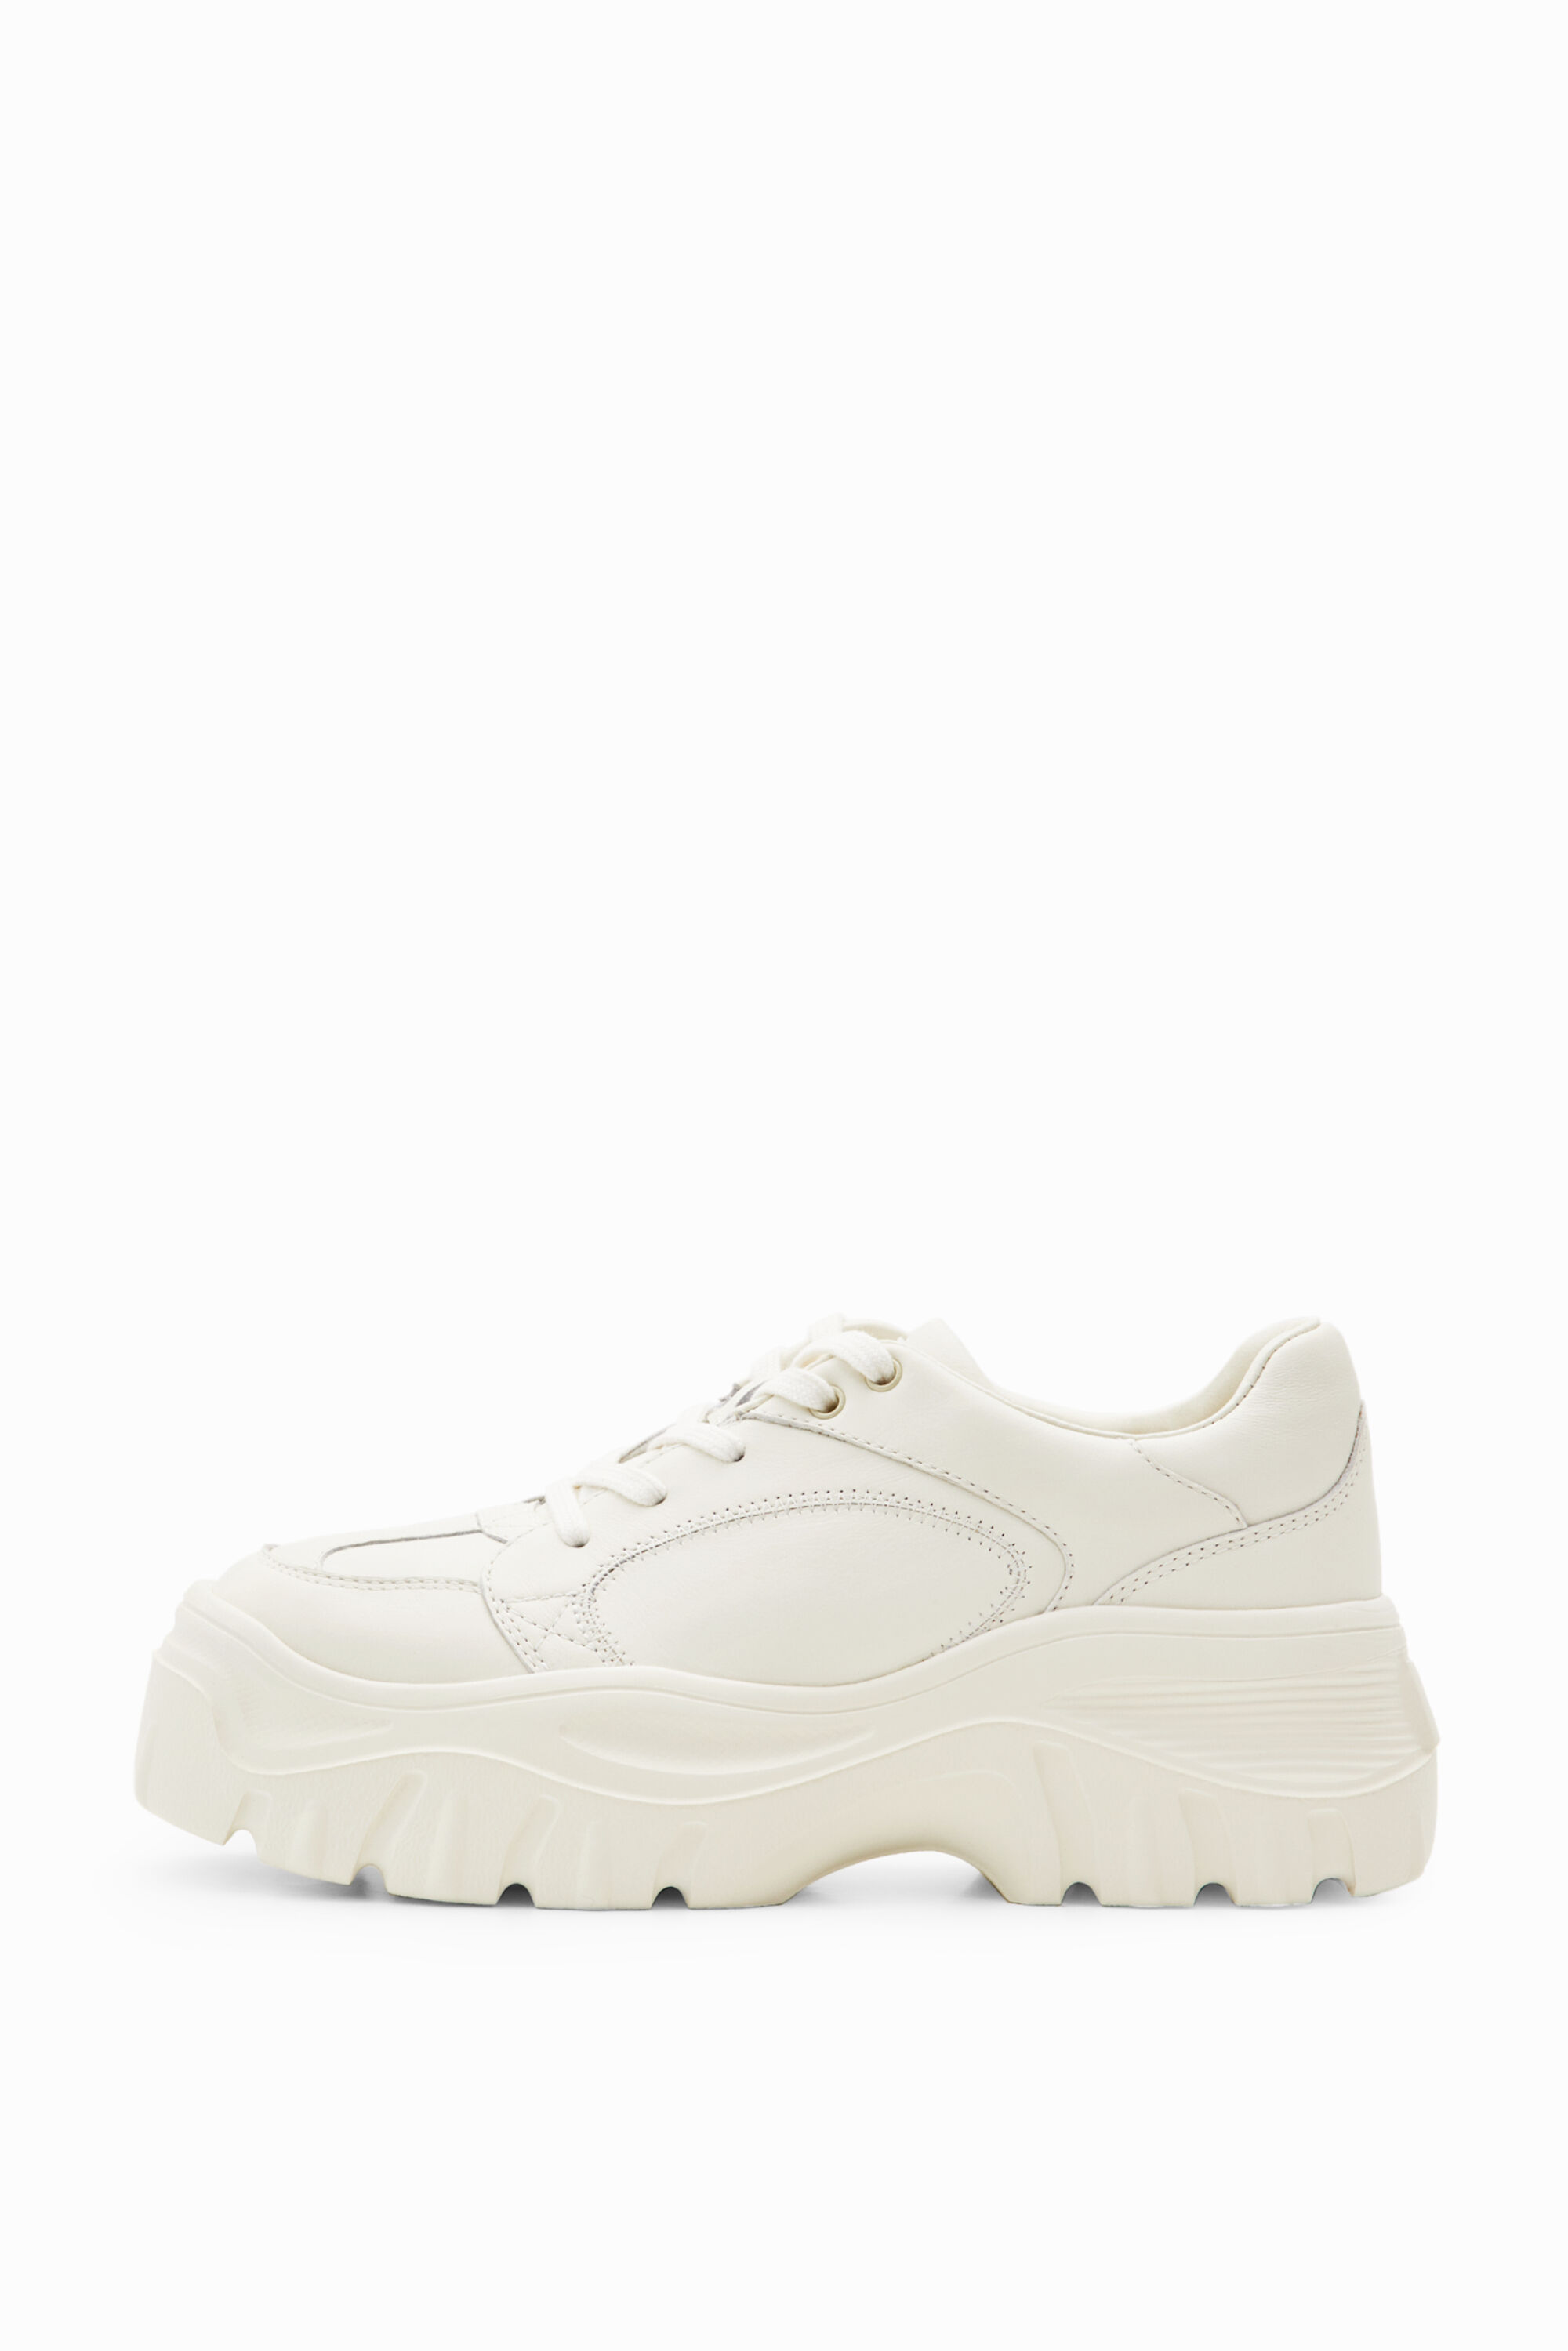 Desigual Chunky Leather Trainers In White